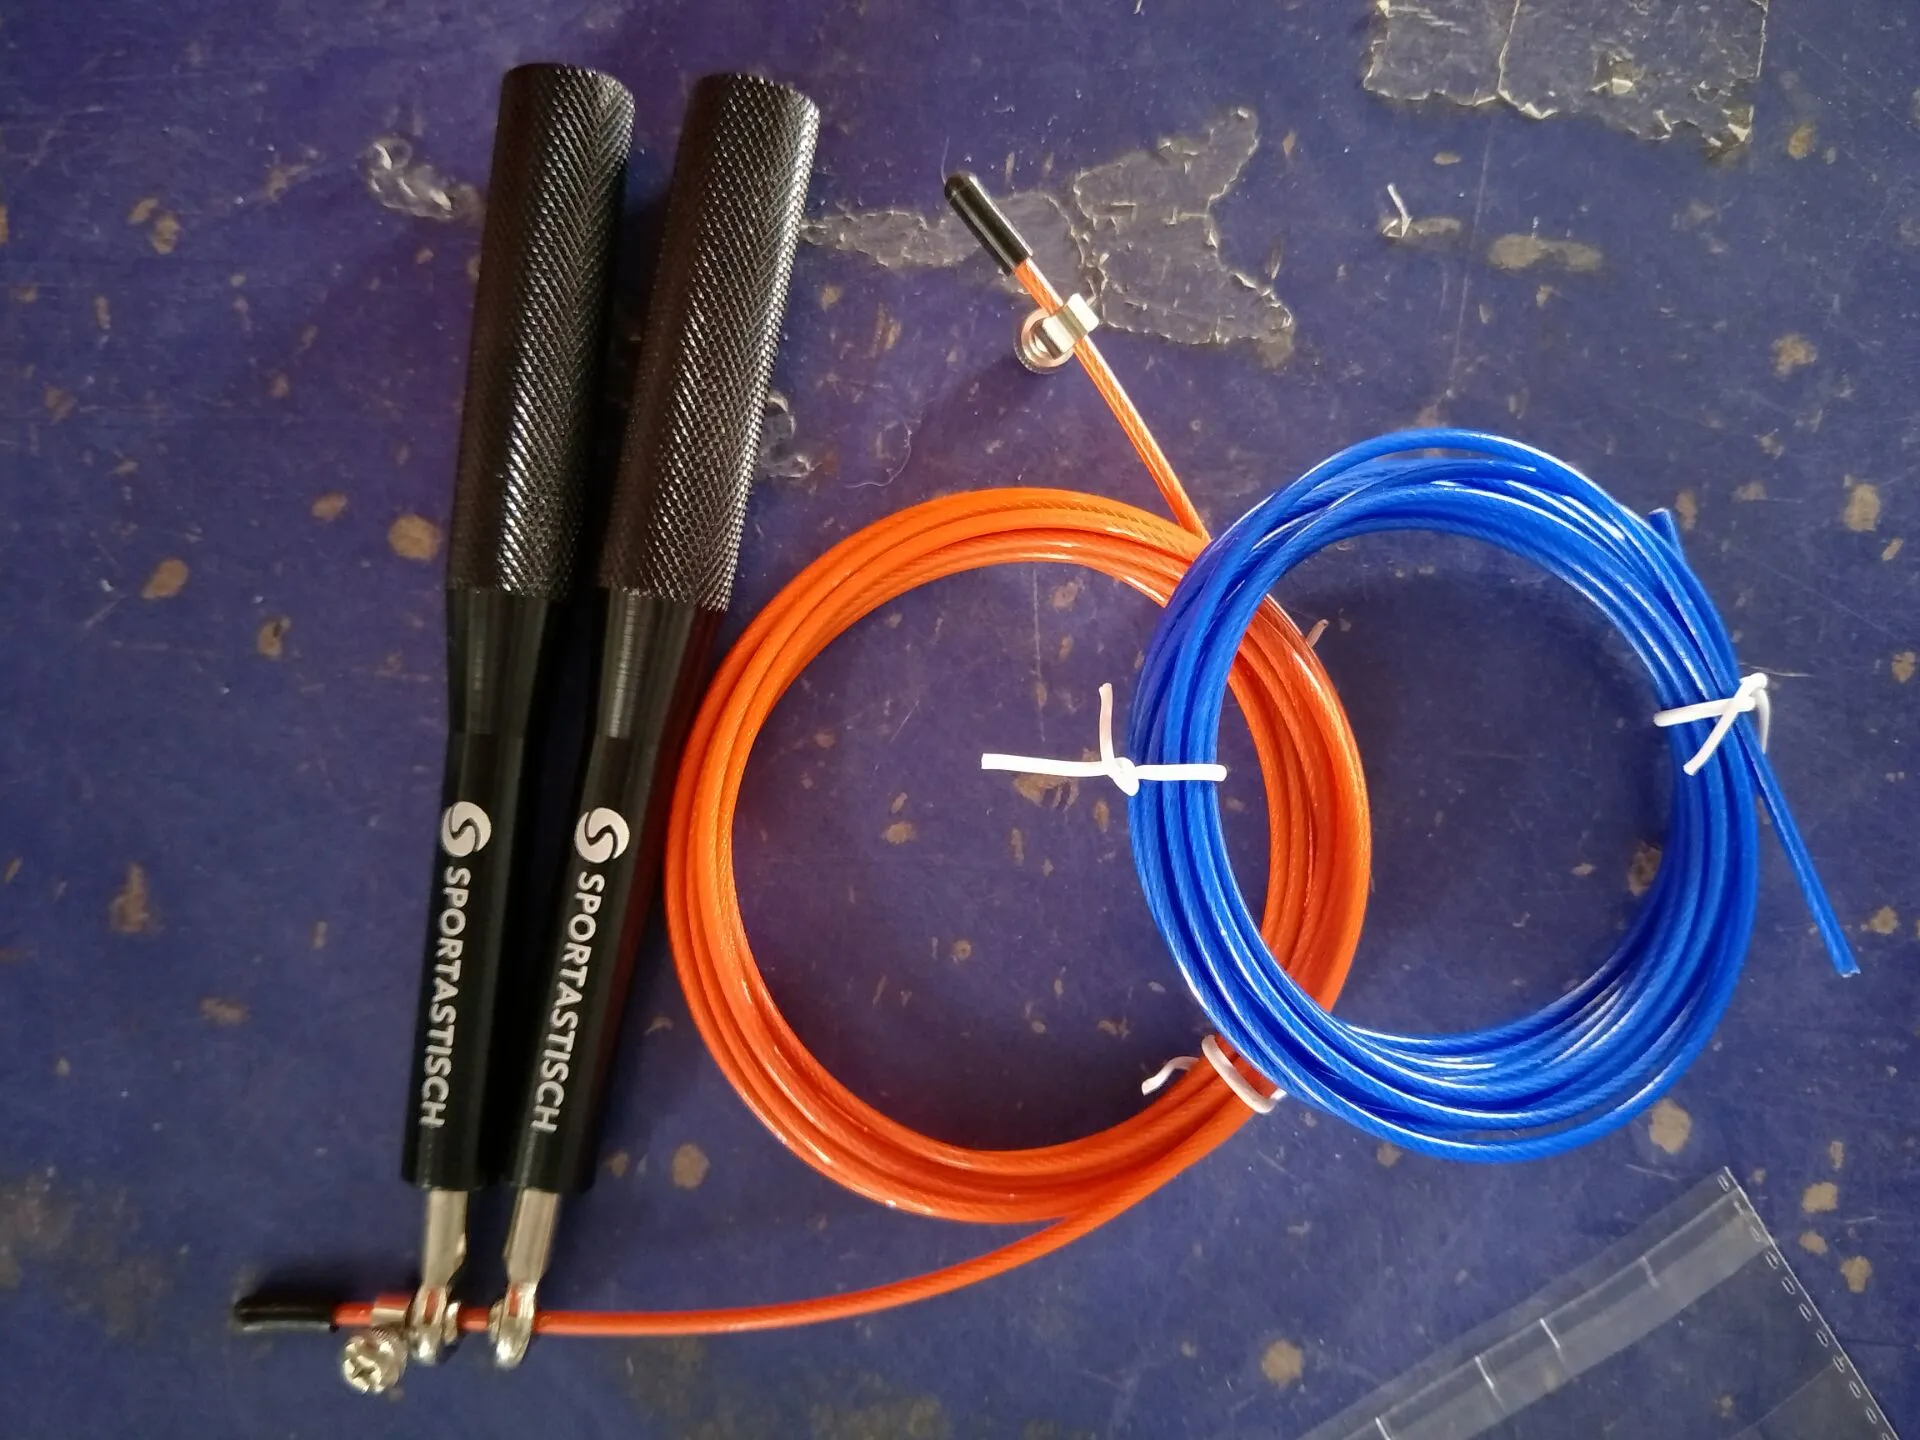 jump rope supplier